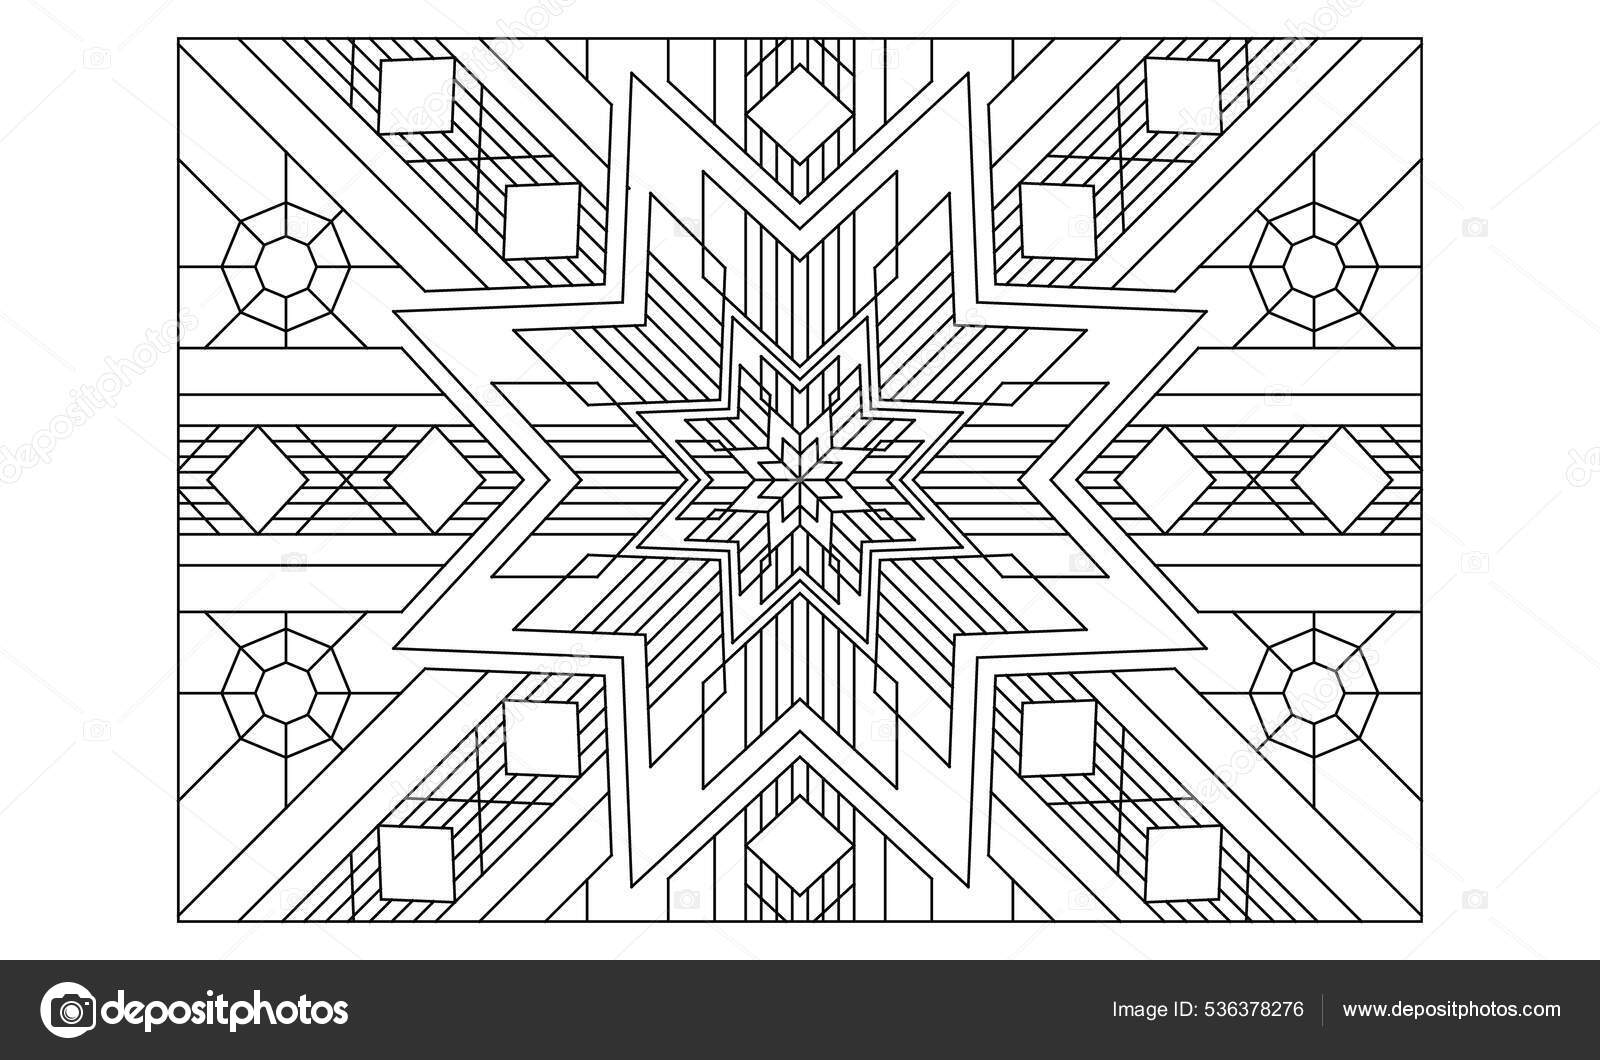 Landscape coloring pages adults coloring coloring page octagonal mandala stock vector by vectorari